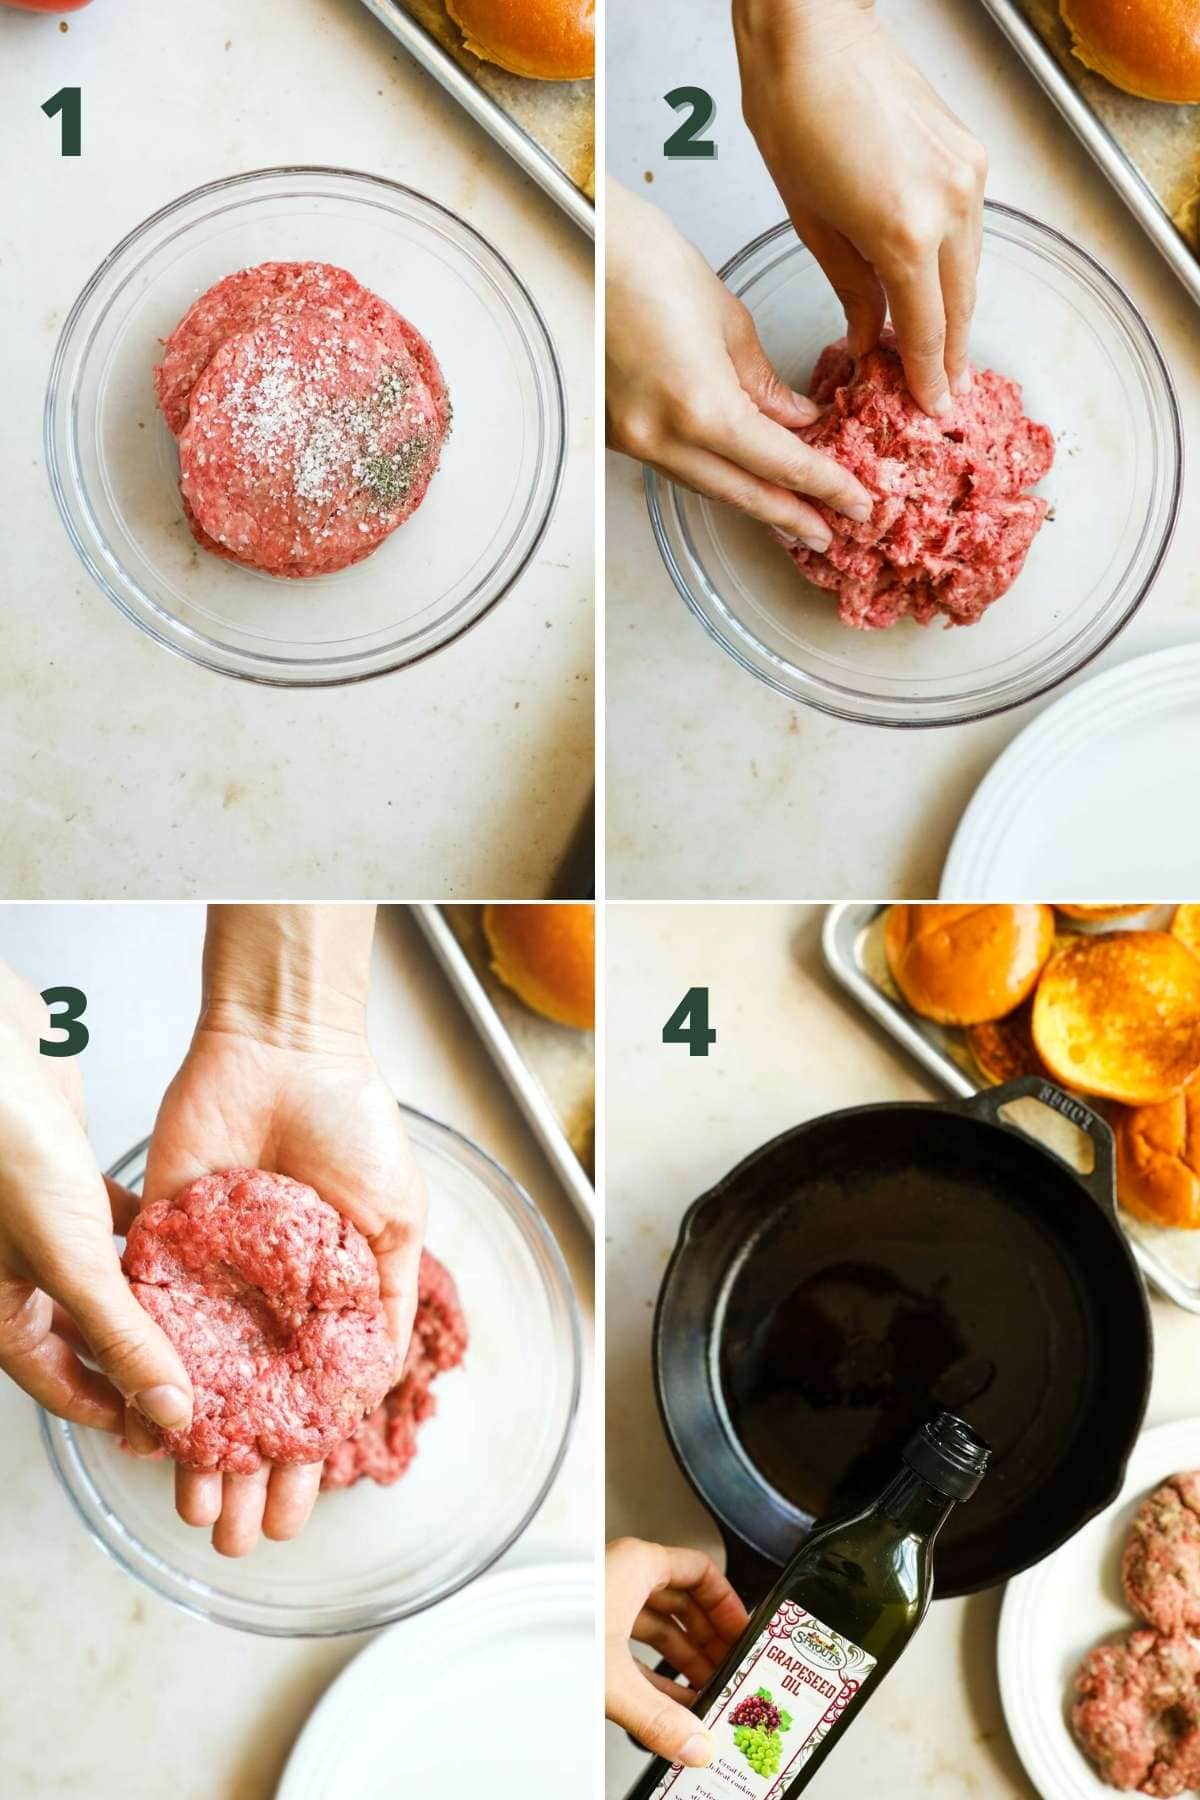 Steps to season and mix the ground wagyu beef for patties.